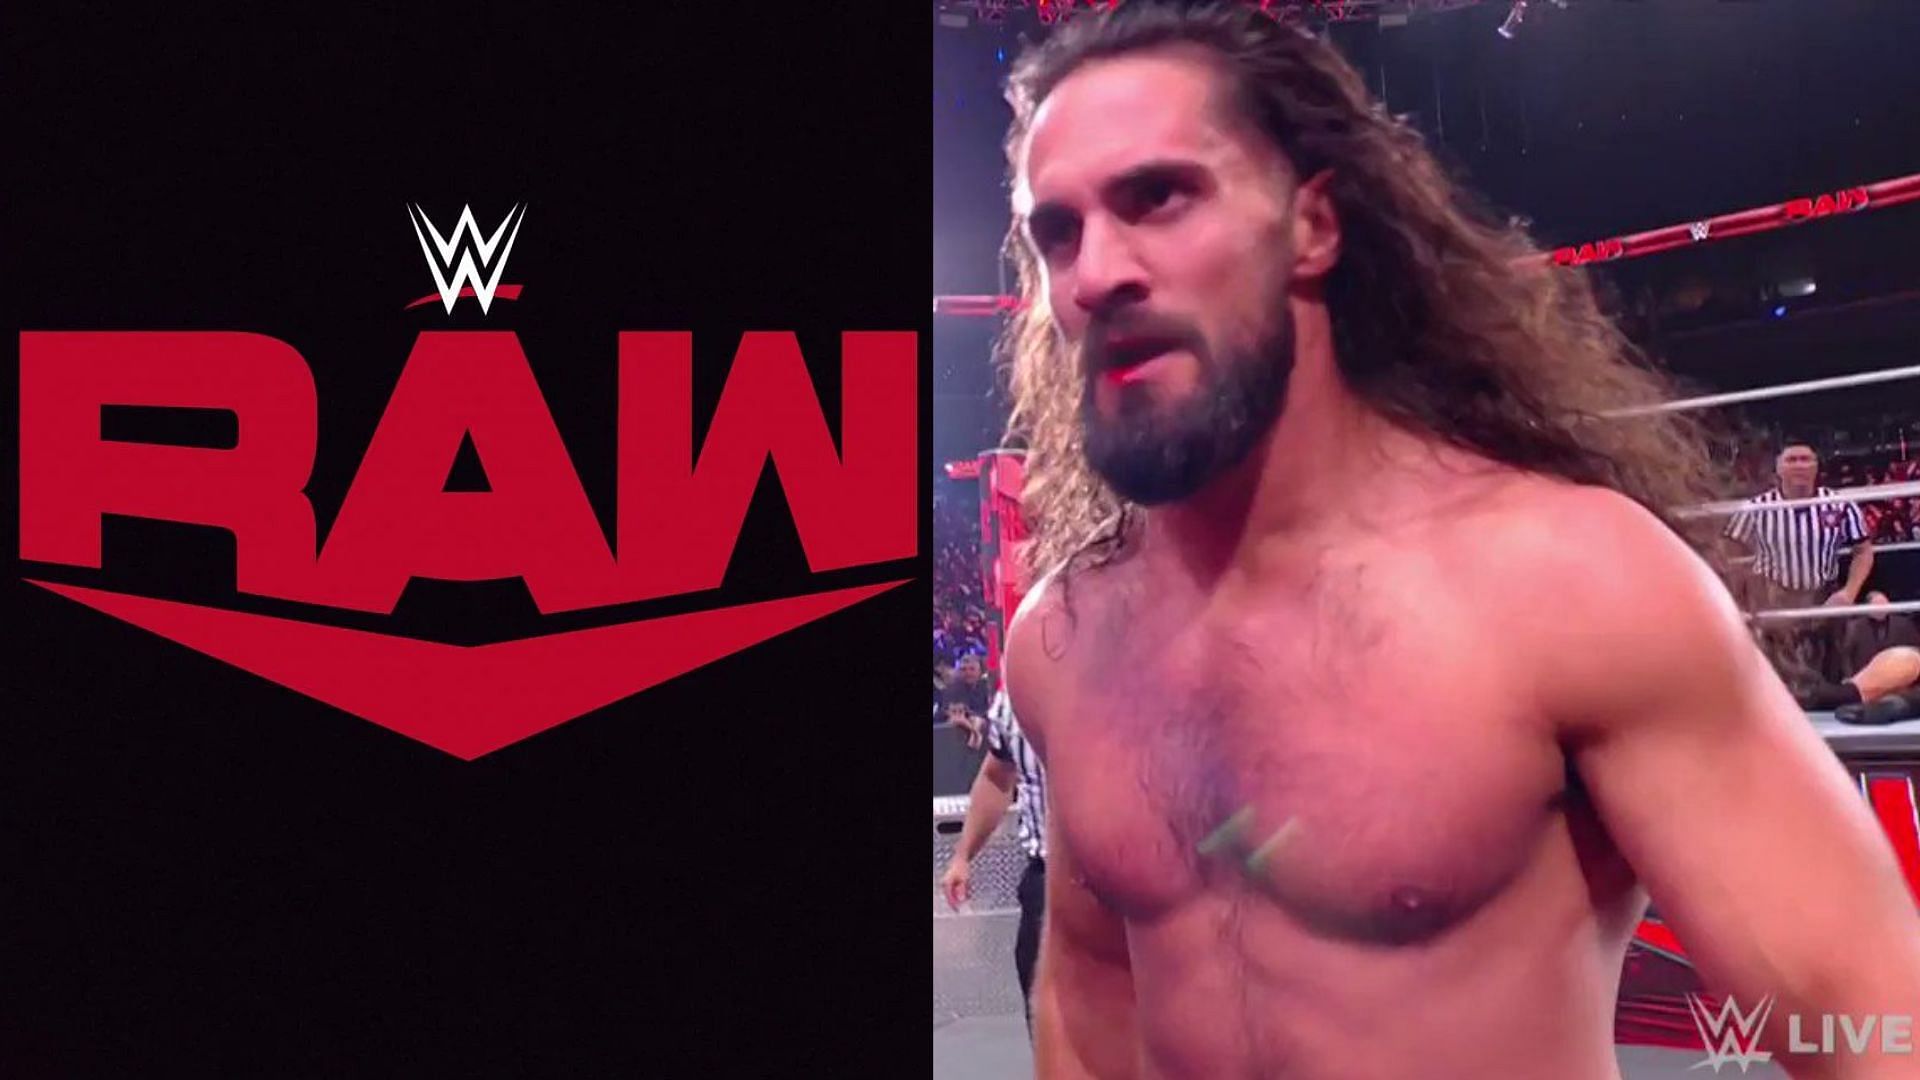 Seth Rollins was involved in post-RAW shenanigans.